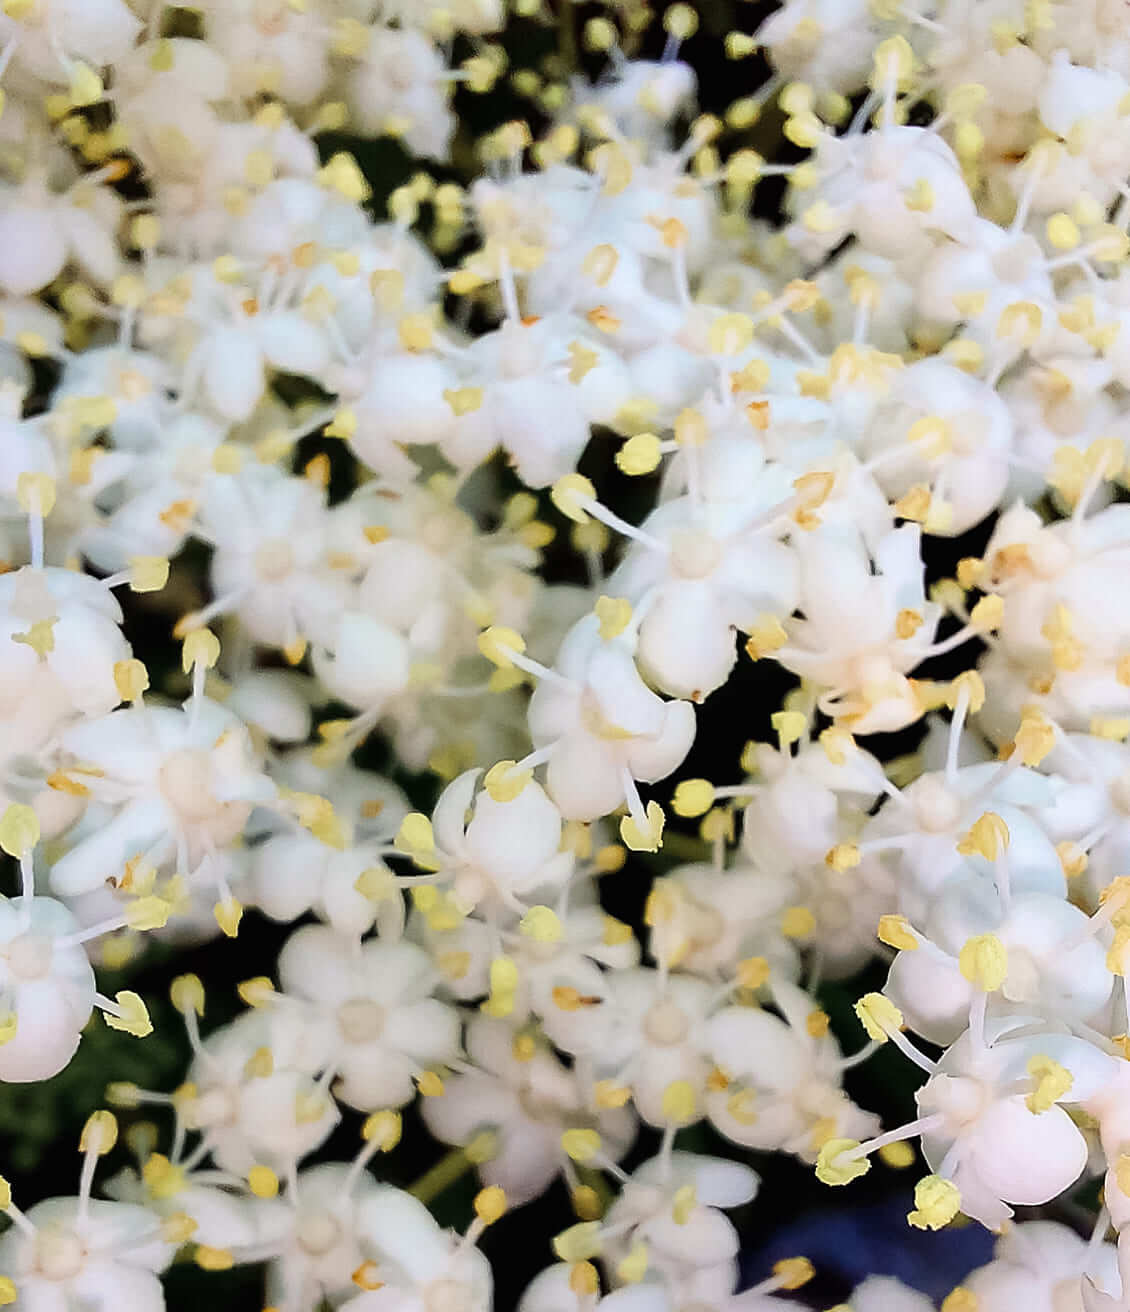 Elder blossoms are used in herbal tea for their sweet fragrance